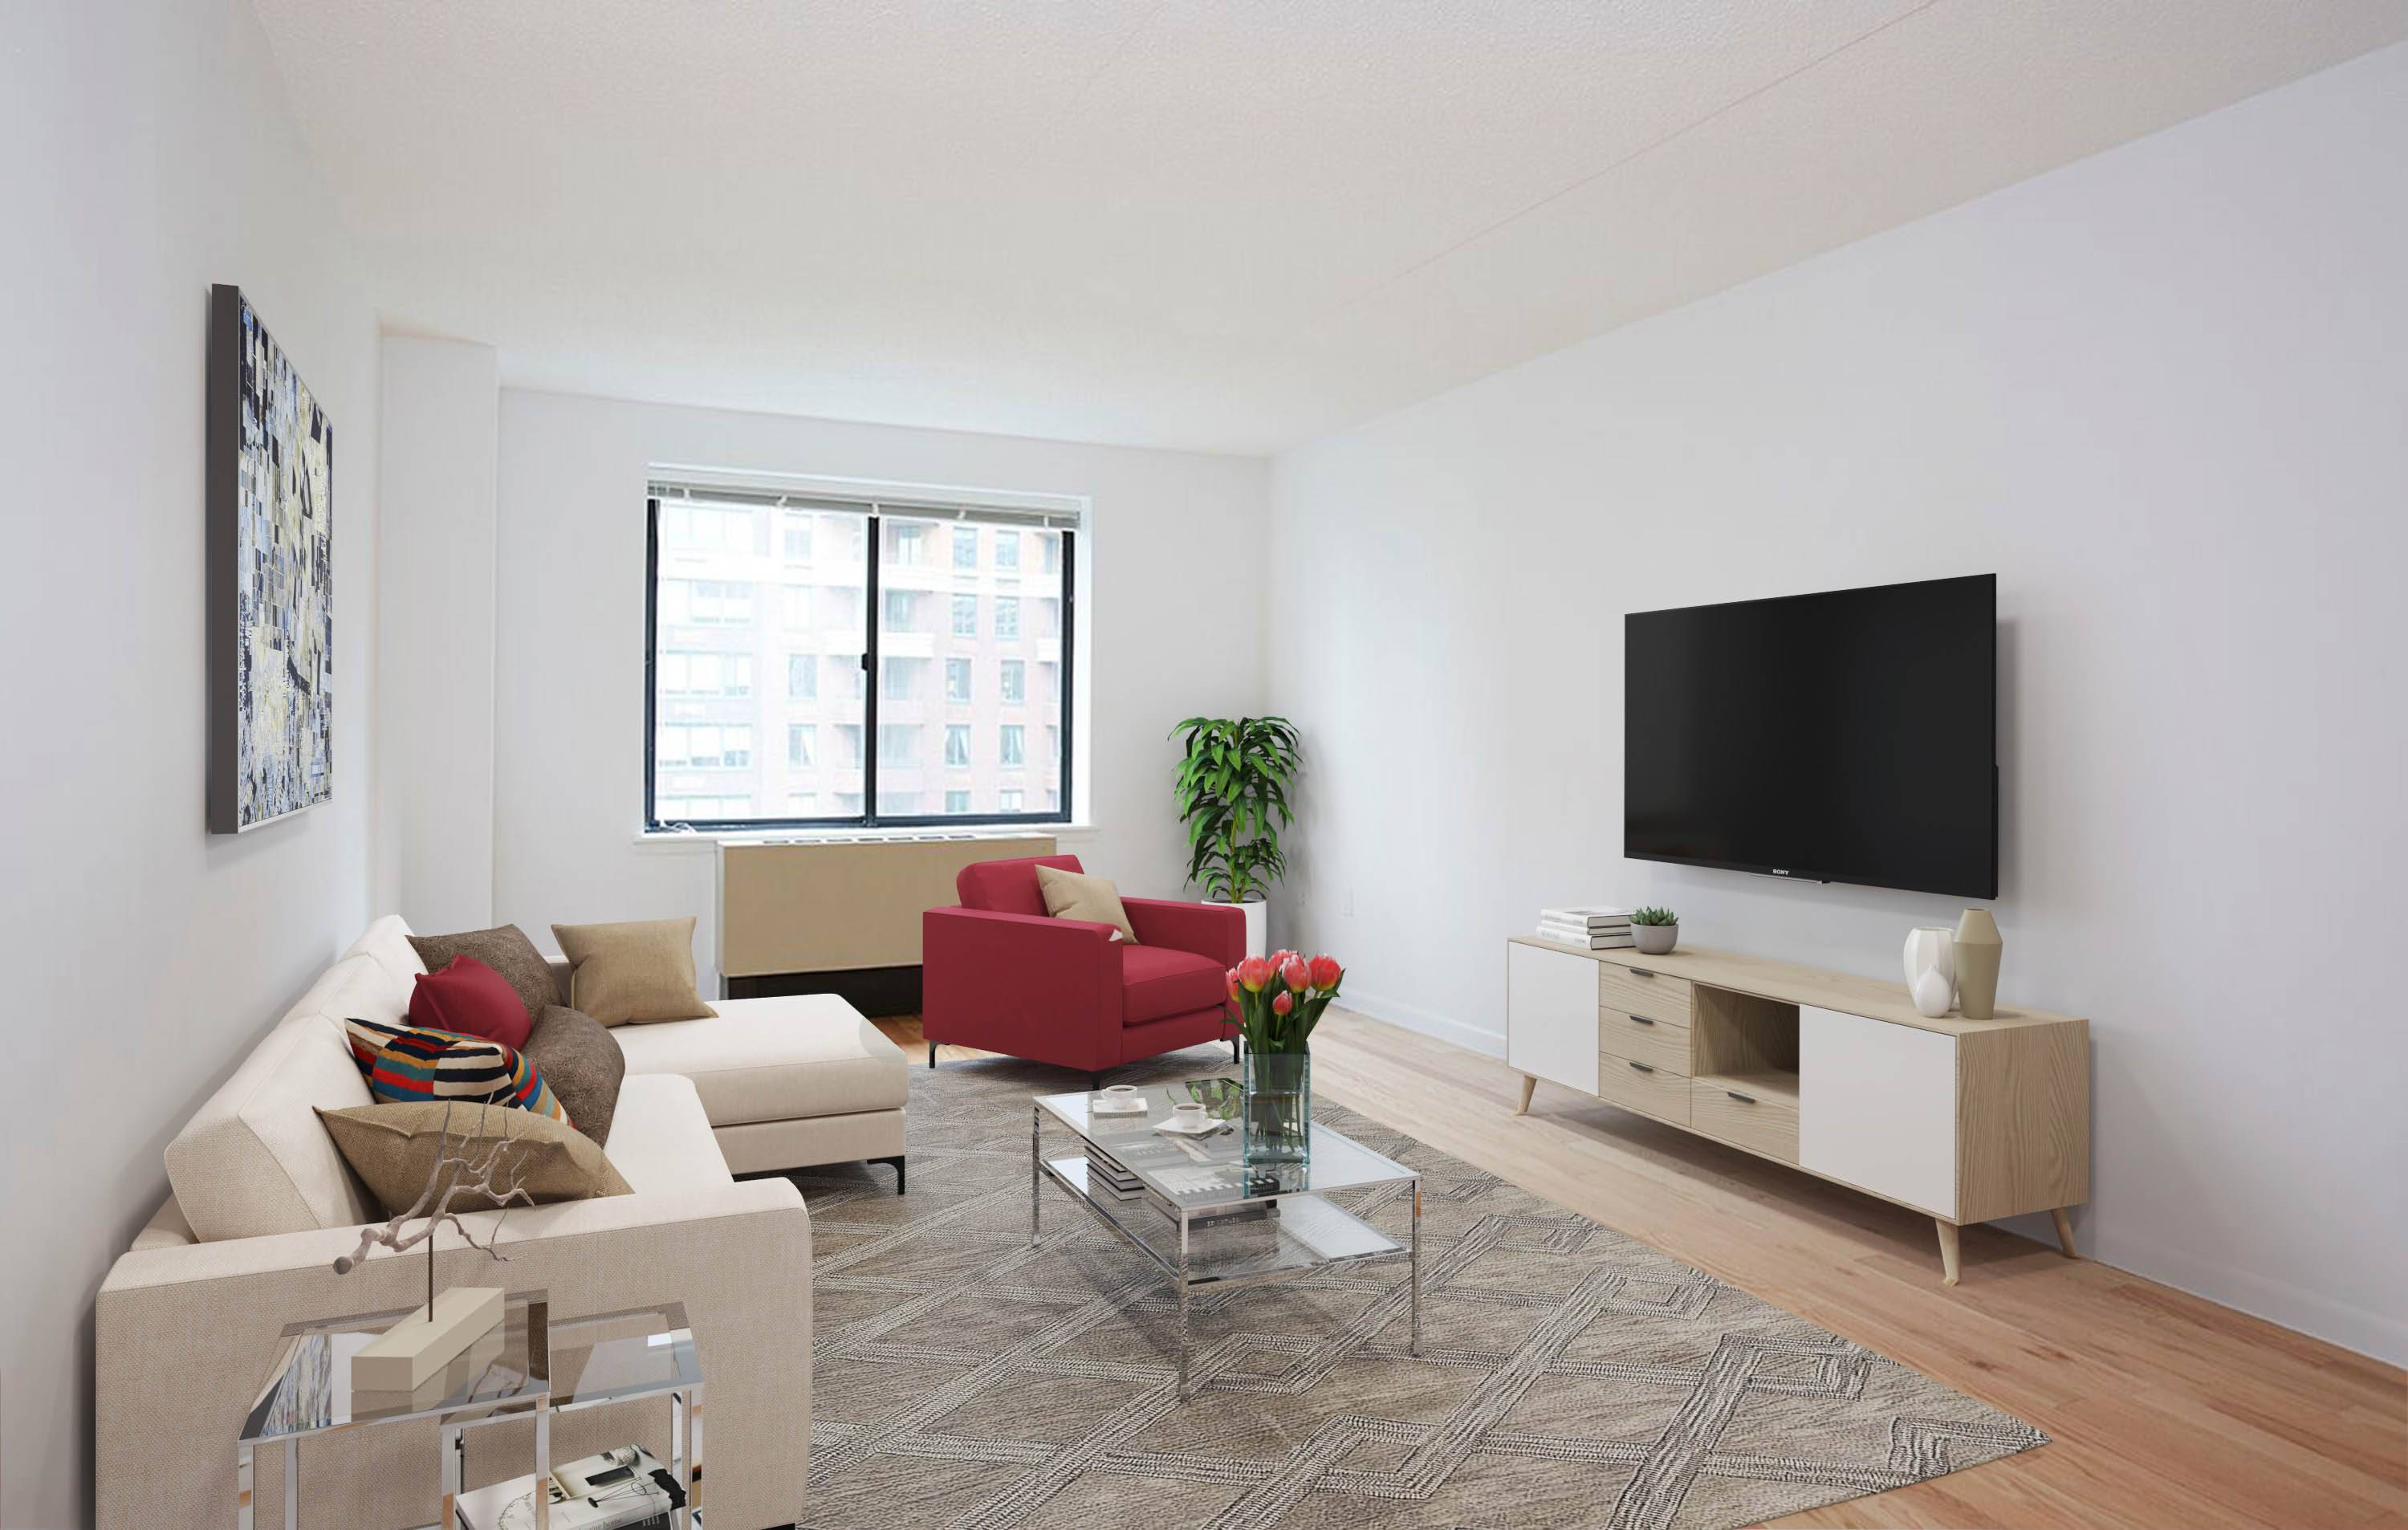 Are you searching for a 1BR that offers a clean, contemporary renovation ?